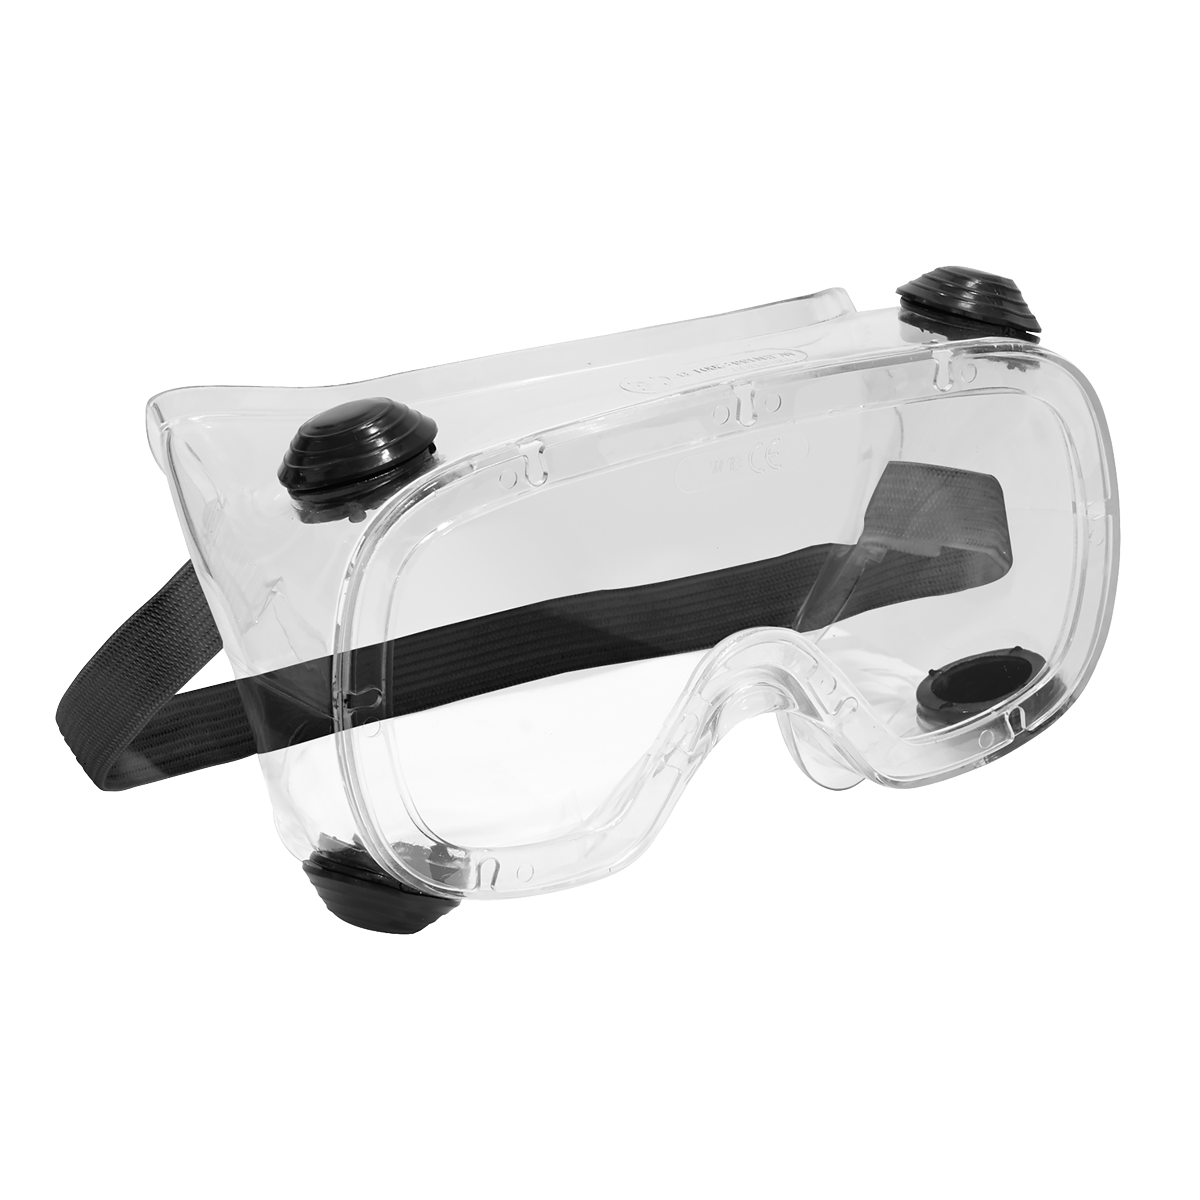 Sealey Standard Goggles - Indirect Vent 201